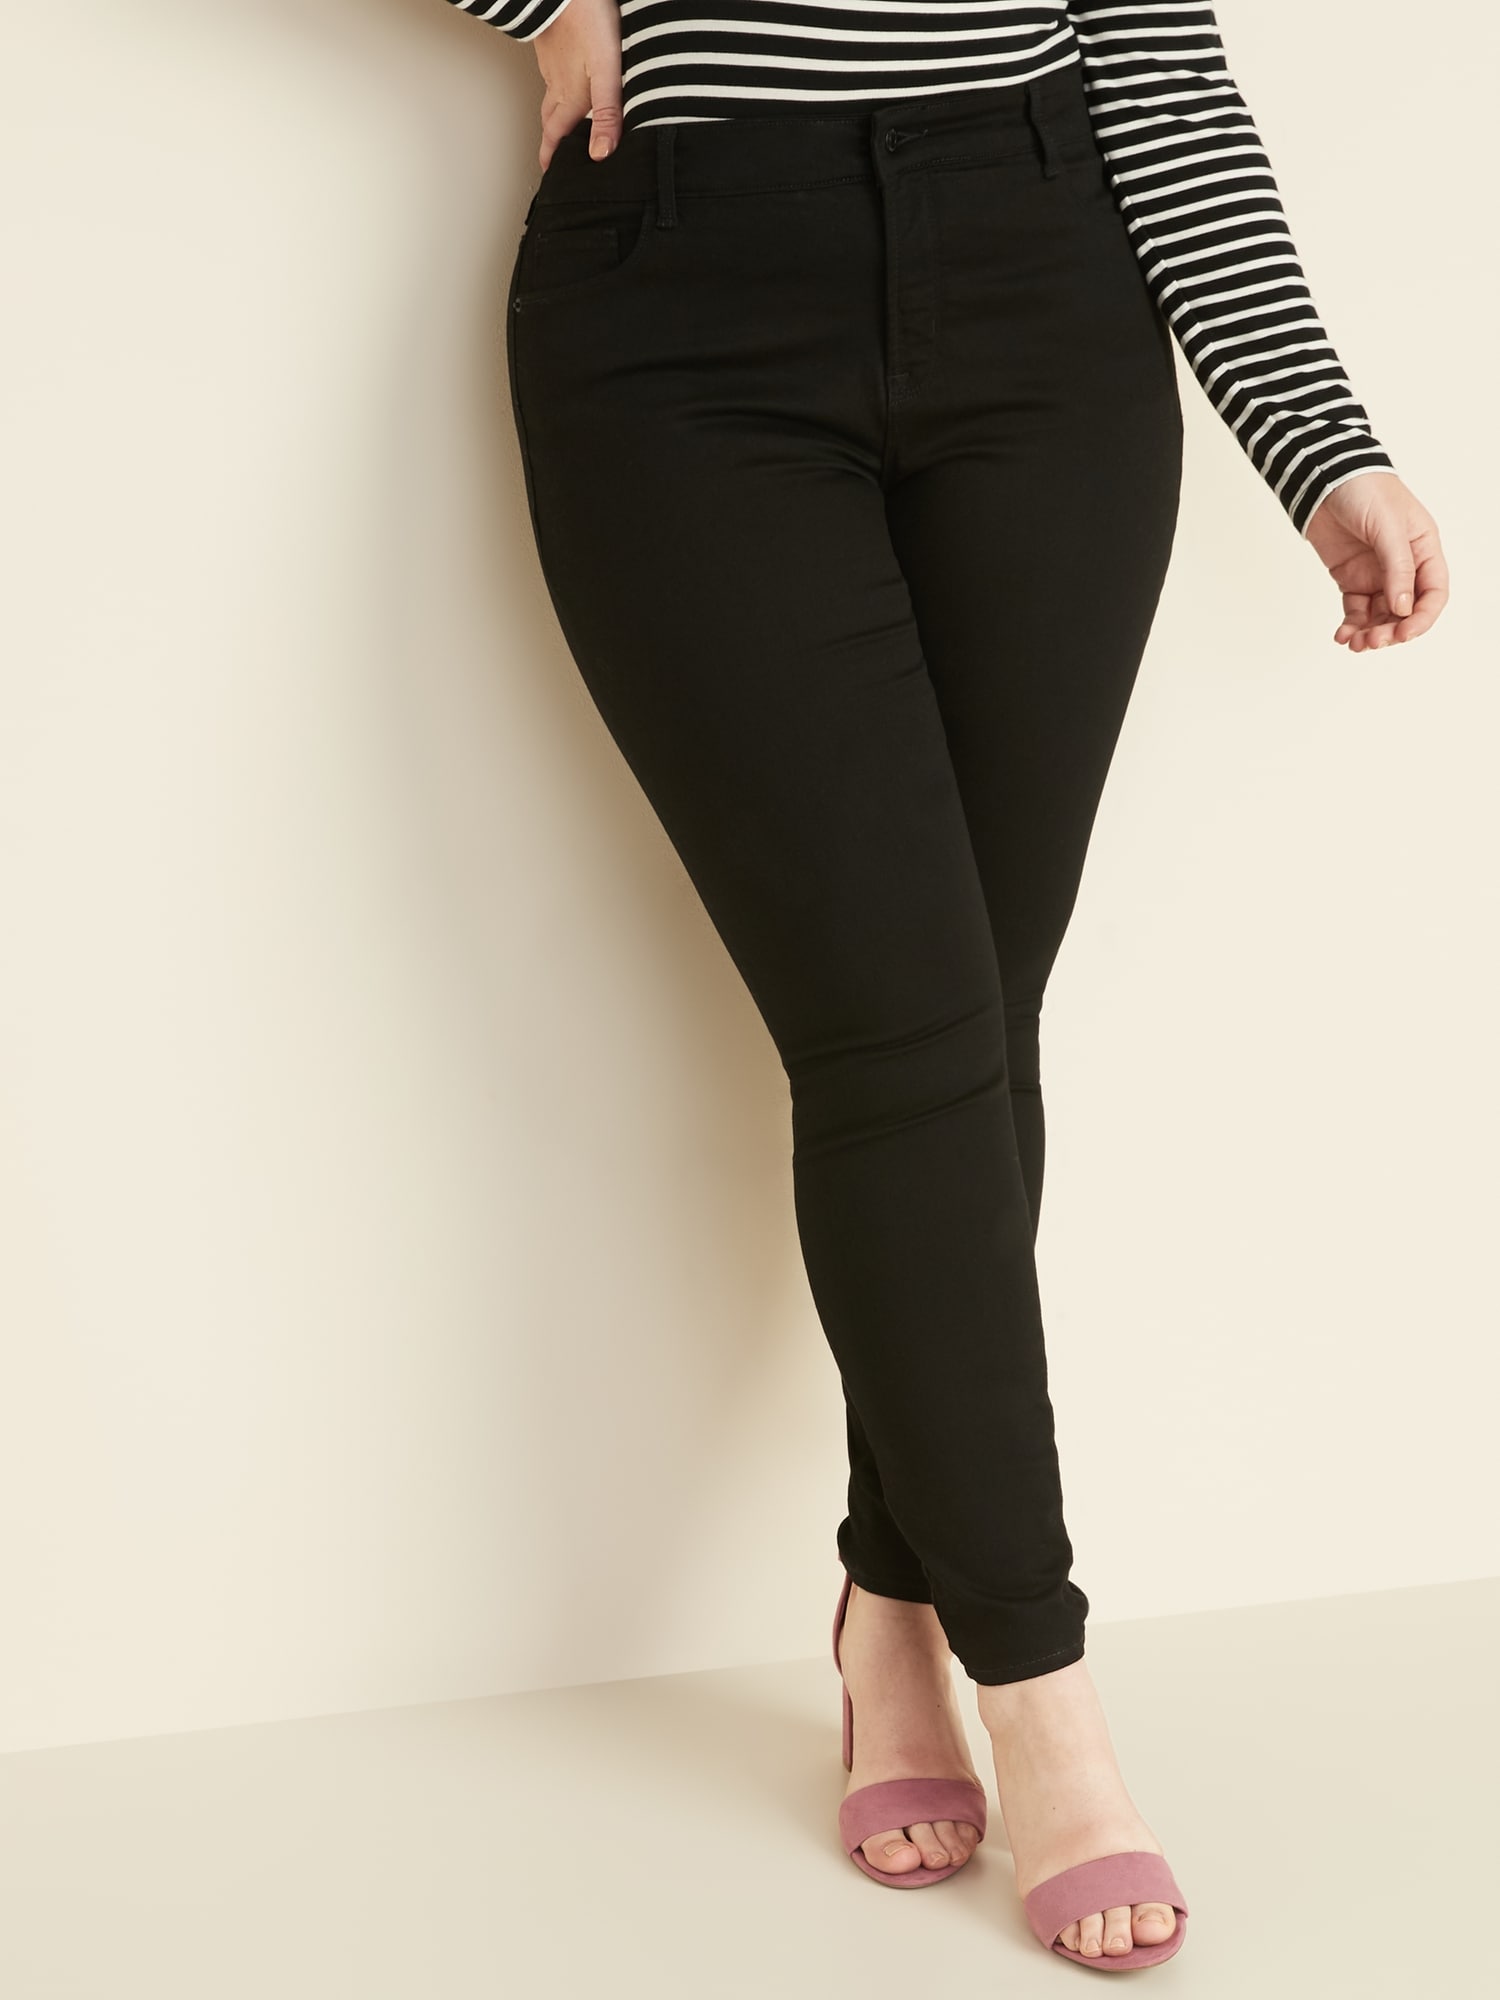 old navy plus size skinny jeans